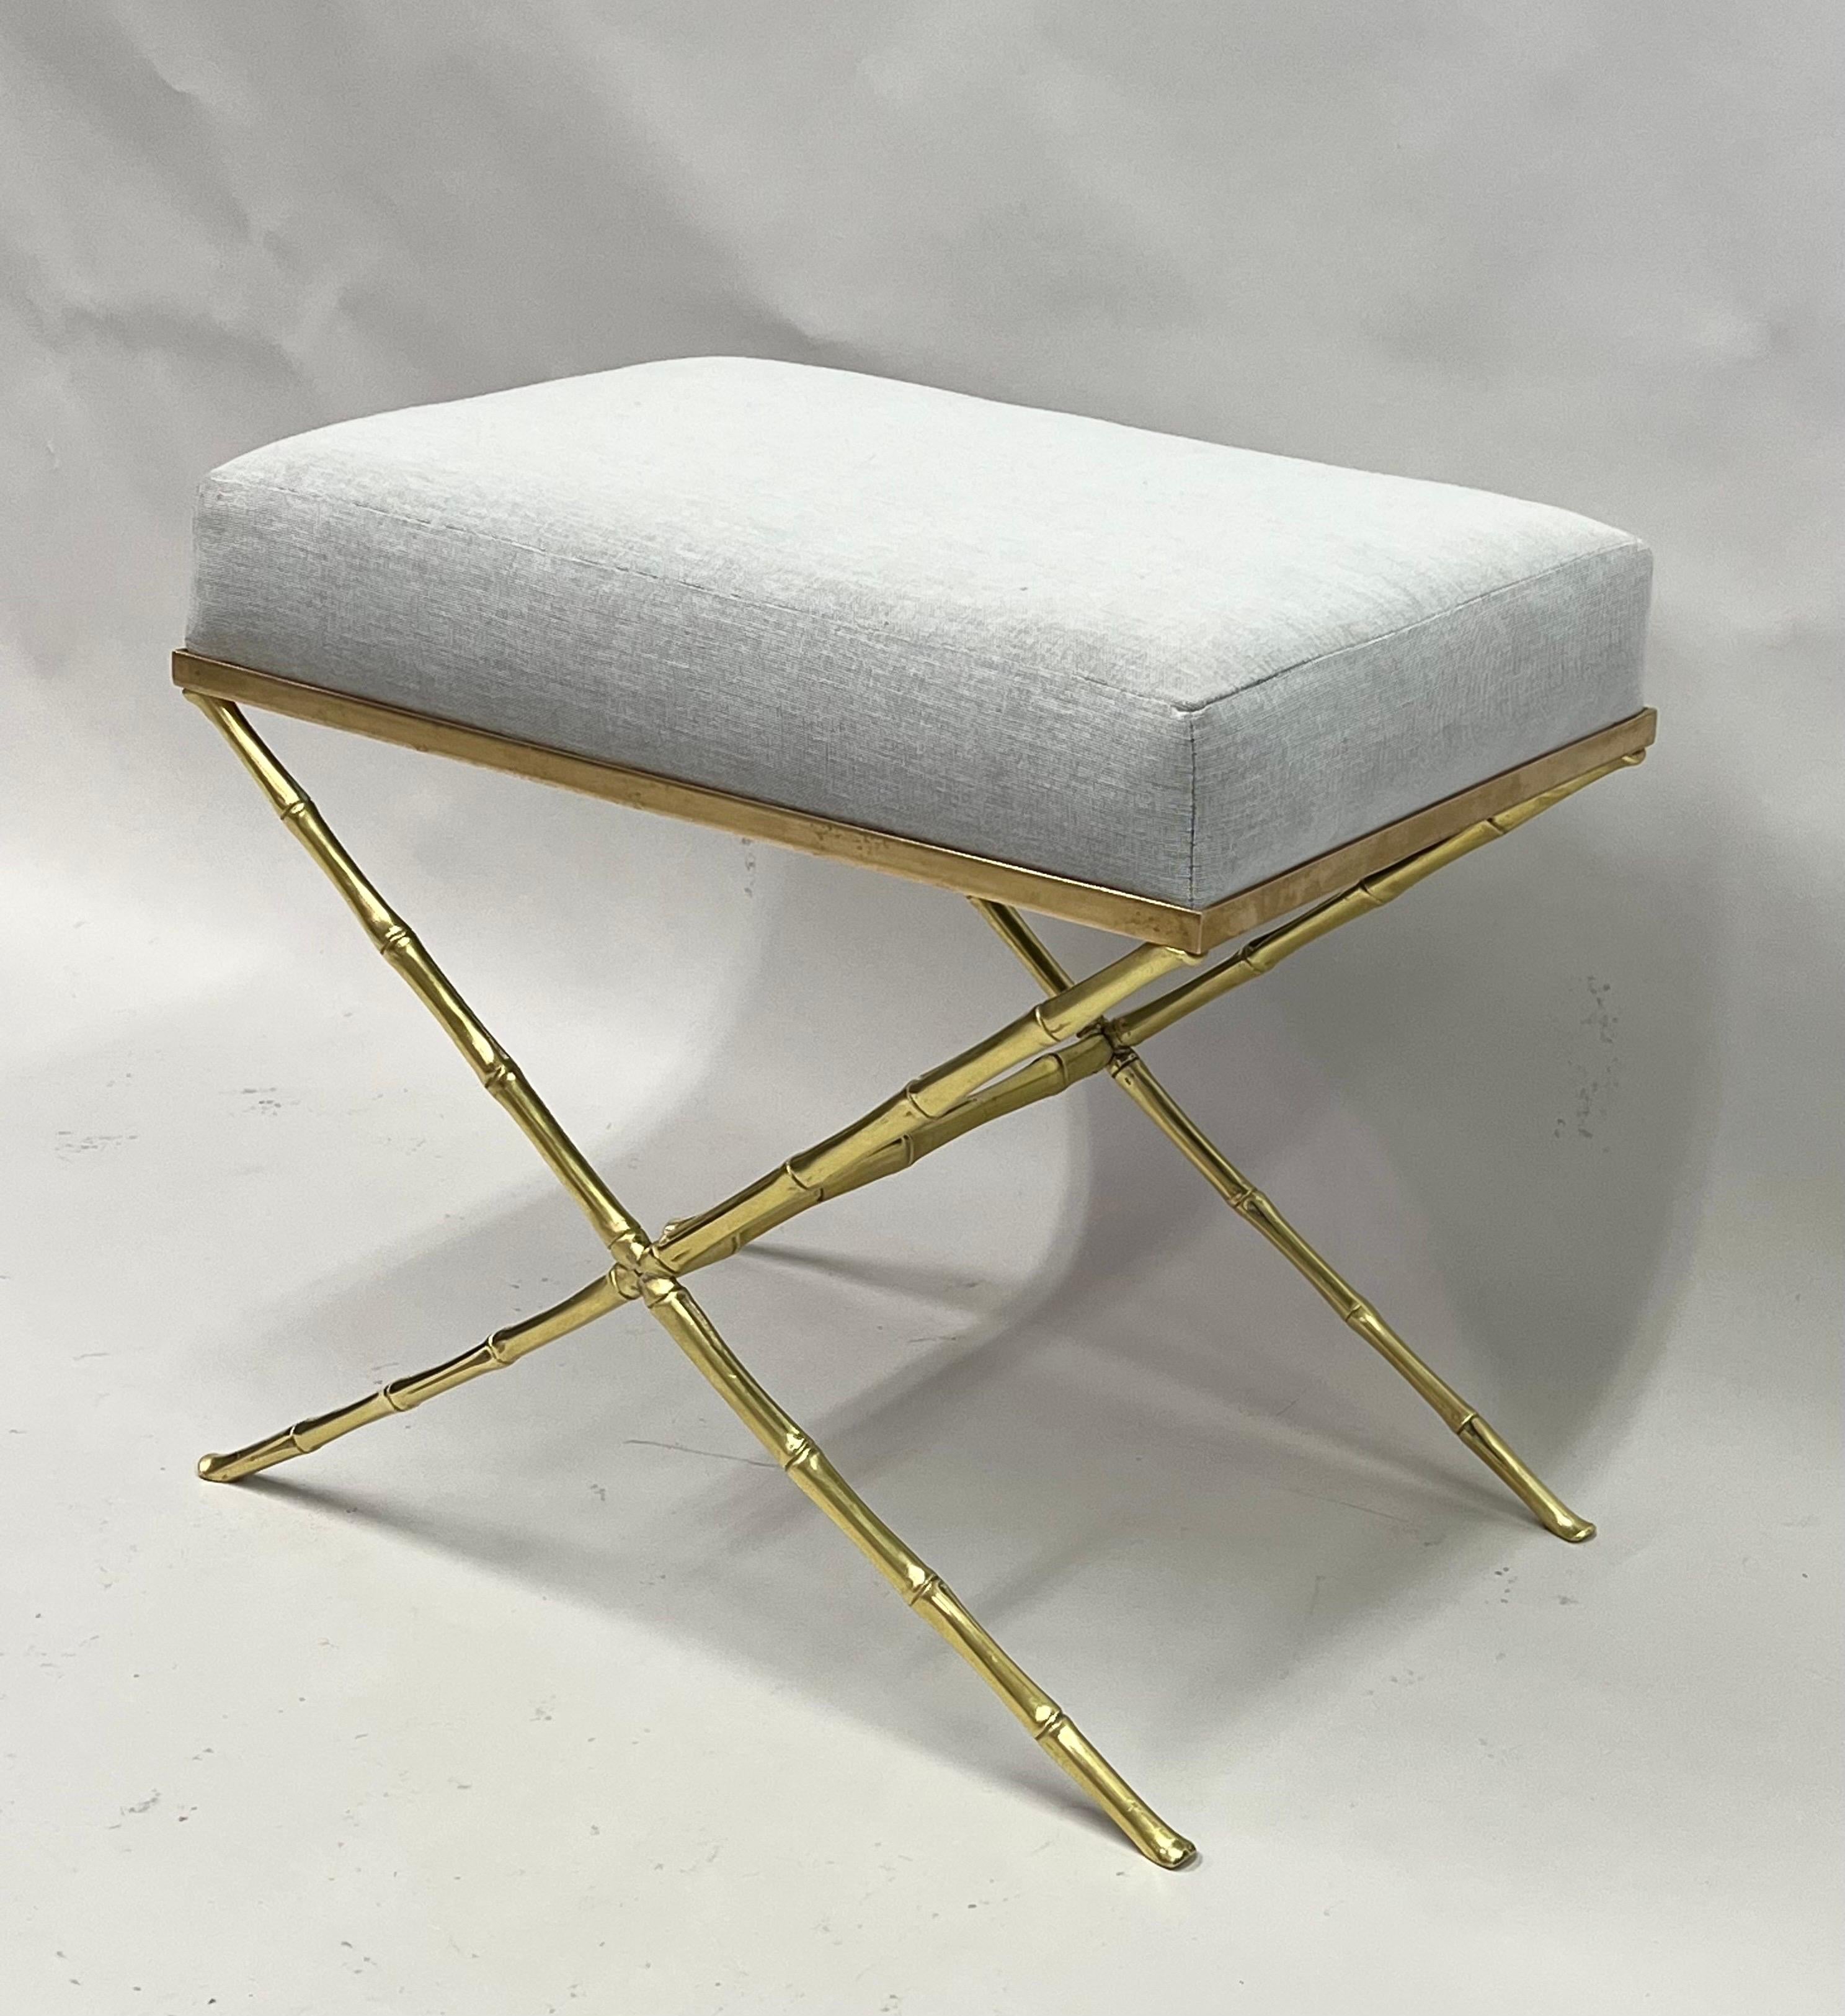 French Mid-Century Modern Neoclassical Brass Faux Bamboo Bench by Maison Baguès In Good Condition For Sale In New York, NY